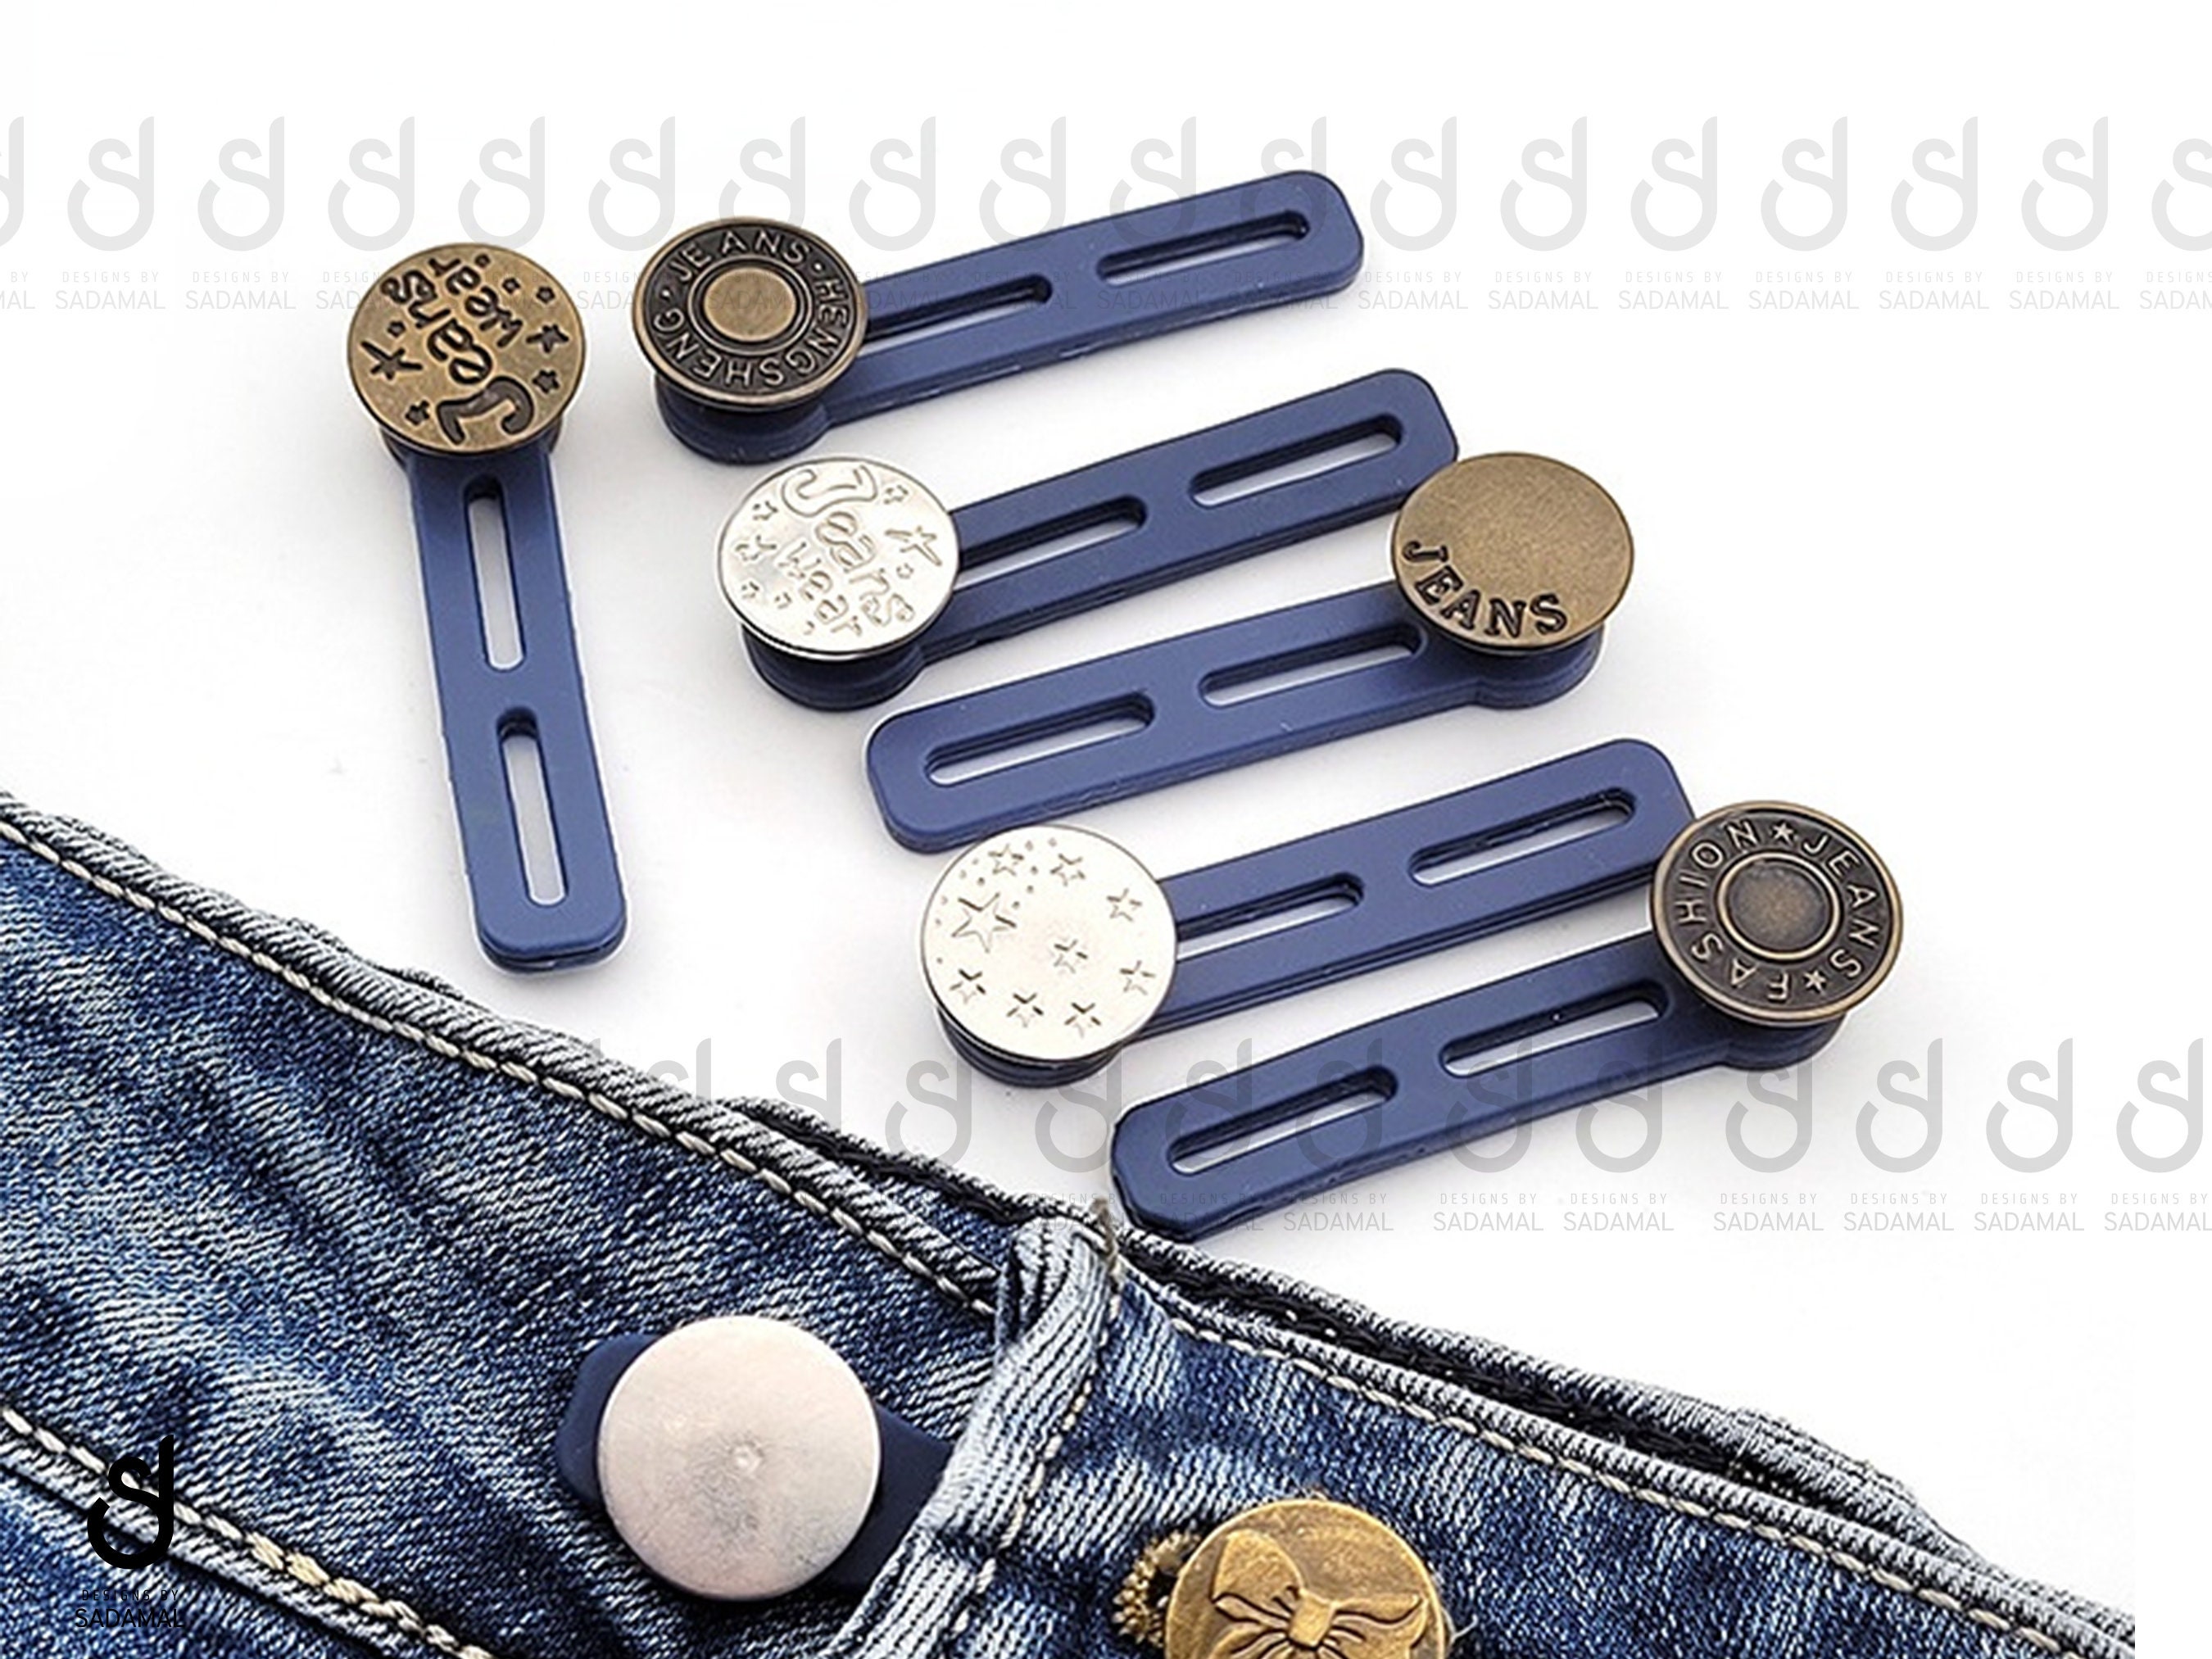 5pcs Snap Closure Metal Buttons For Jeans Pants Adjust Button DIY Sewing  Craft